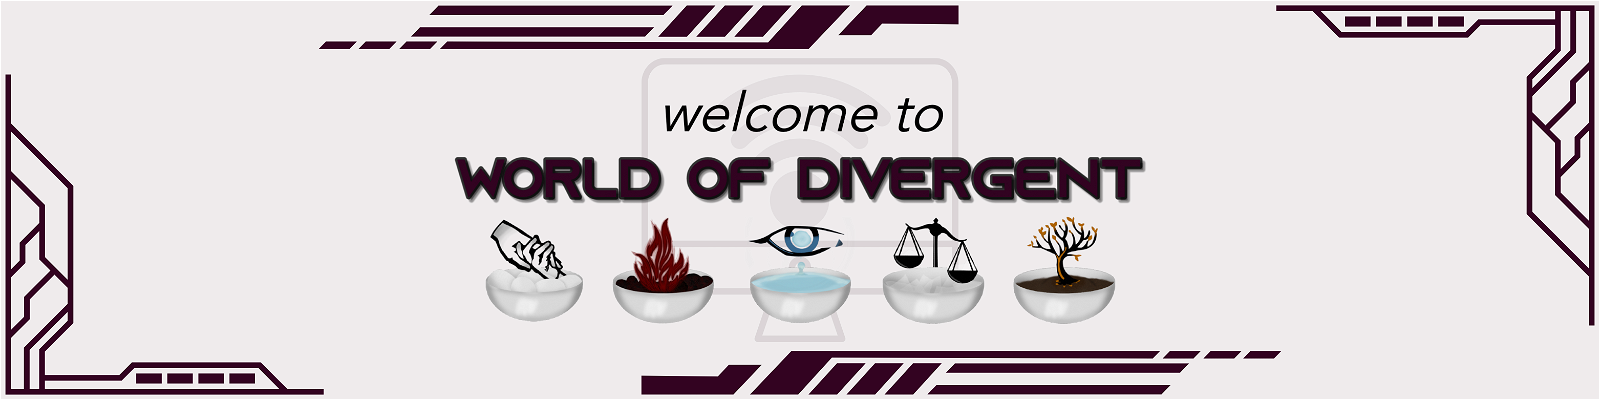 A Divergent Online Game? Discover World of Divergent